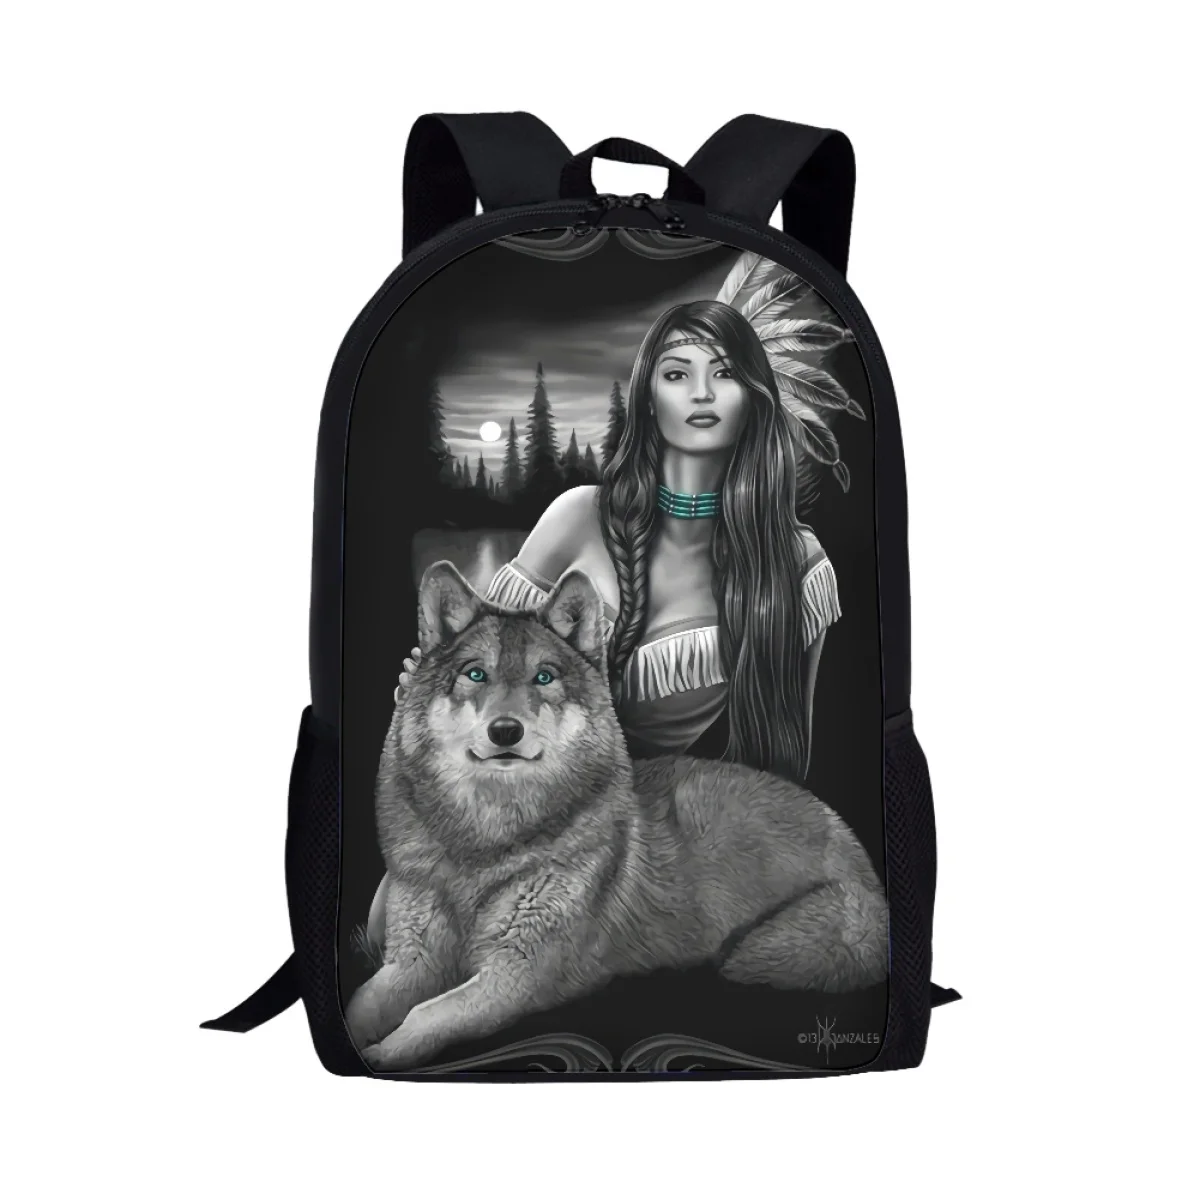 

Feather Maiden Wolf Backpack Large Capacity Adjustable Side Internal Pocket Adult School To Schoolbag Travel Outdoor Satchel